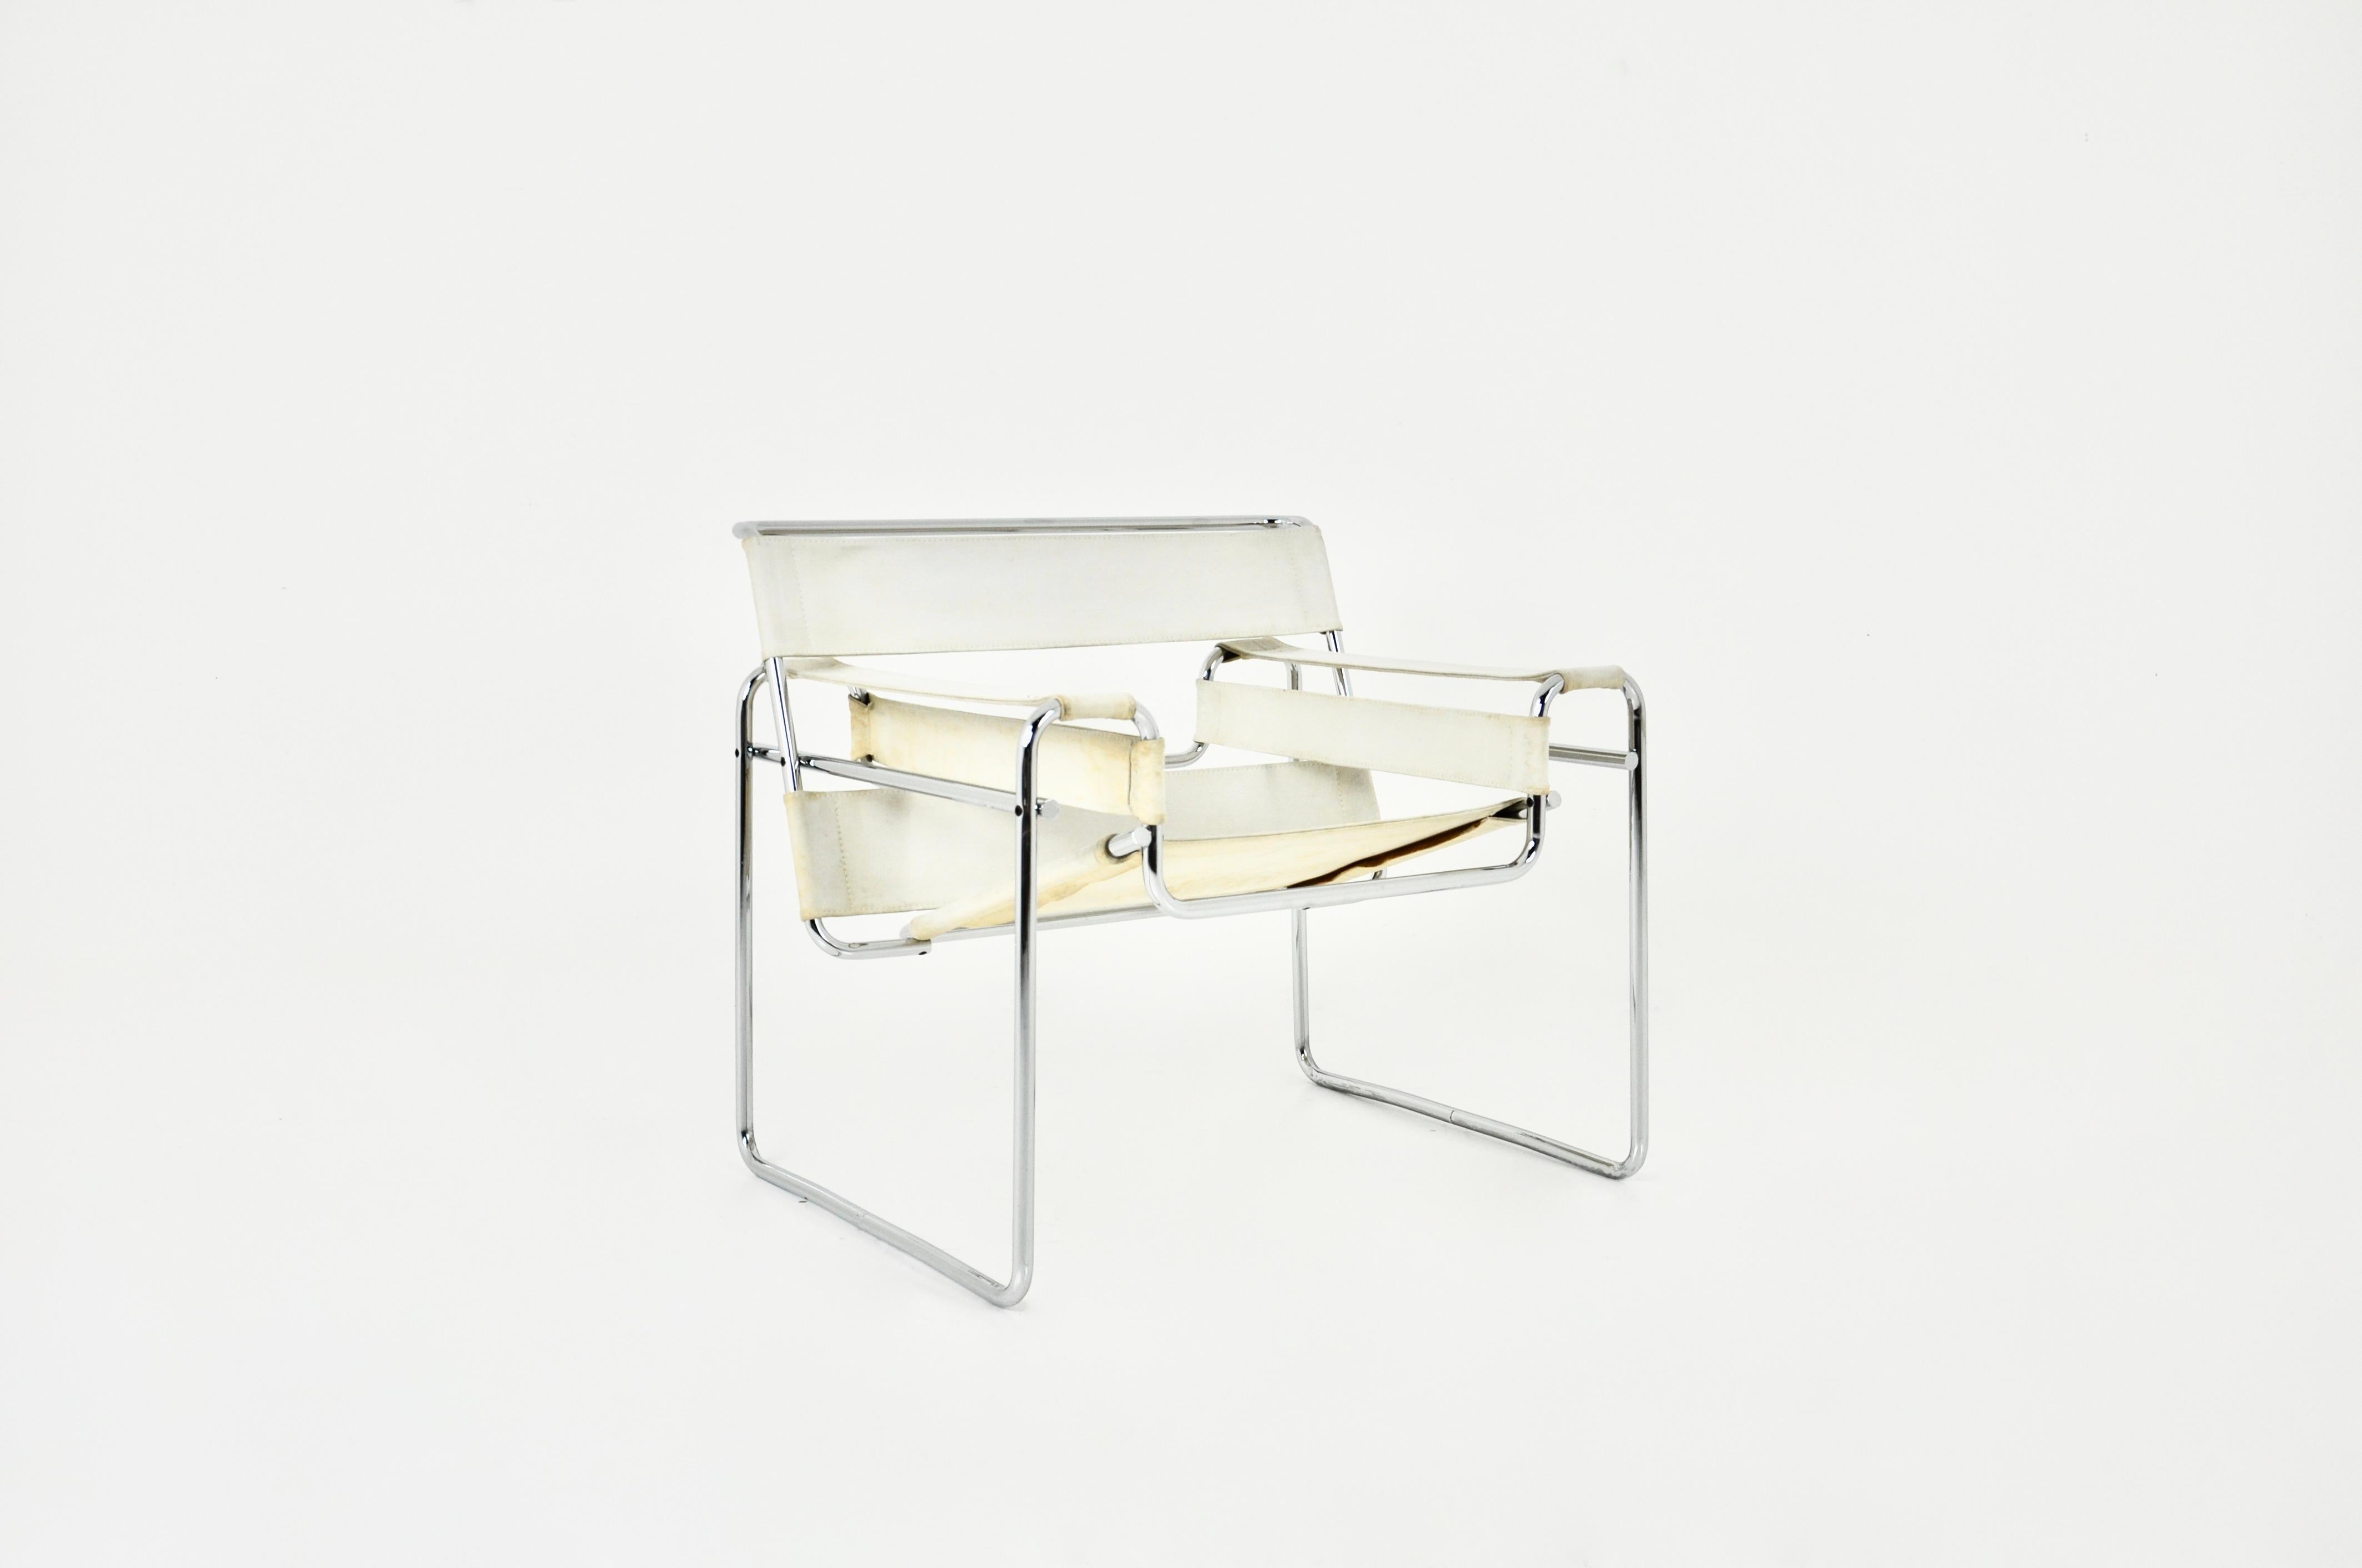  Armchair in Chromed metal and cream fabric by Marcel Breuer. Seat height: 43 cm. wear due to time and age of the chair.